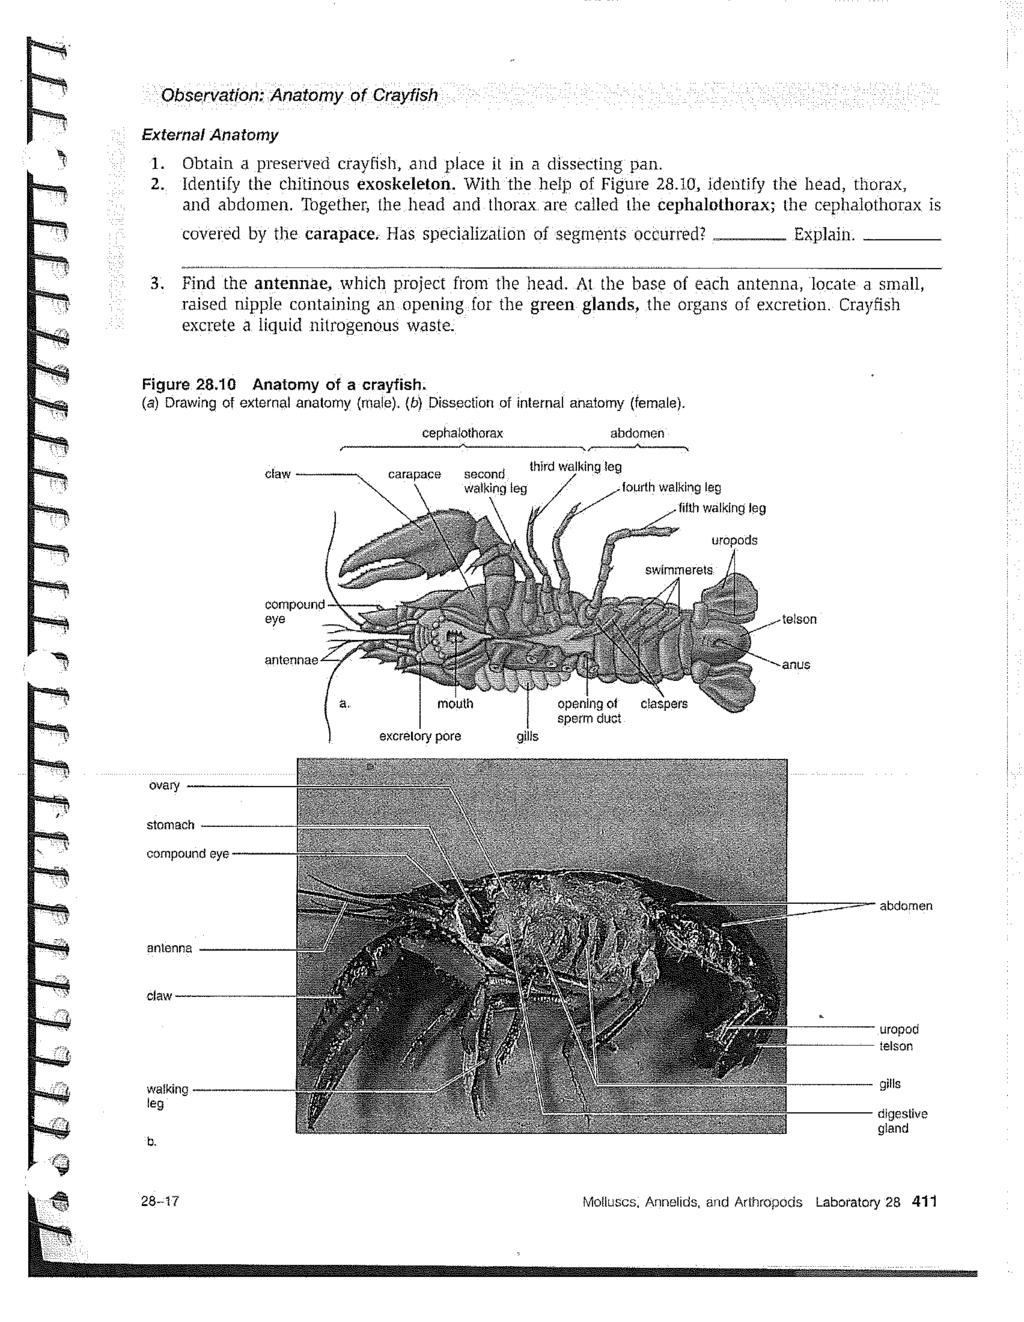 Observation: Anatomy of Crayfish External Anatomy 1. Obtain a preserved crayfish, and place it in a dissecting pan. 2. Identify the chltinous exoskeleton. With the help of Figure 28.